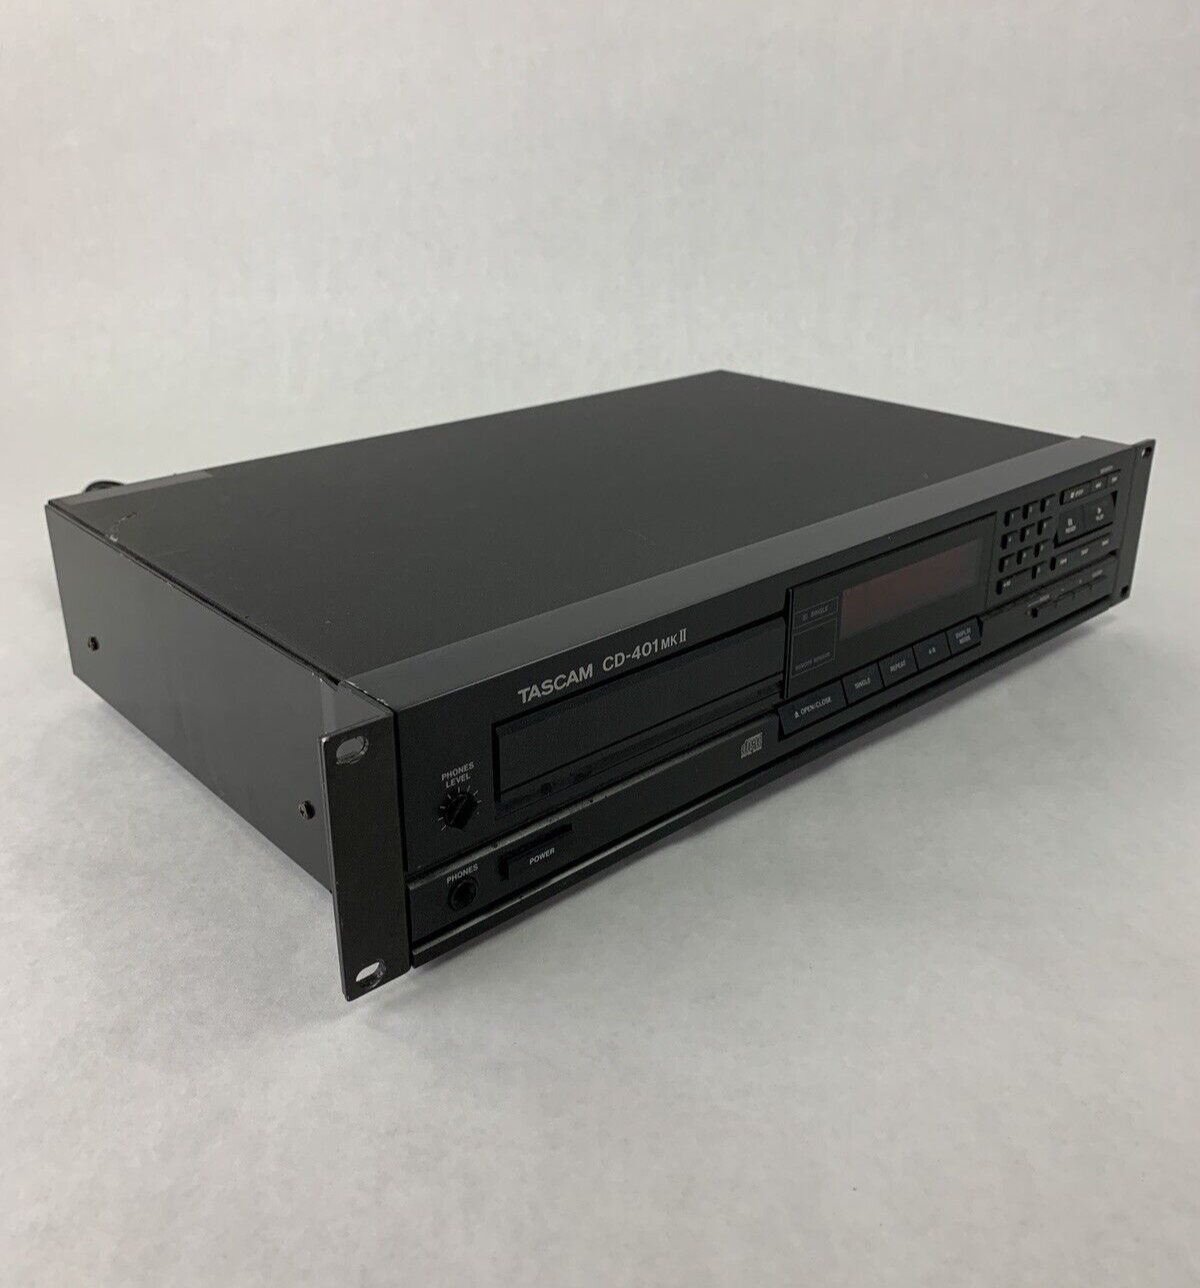 Tascam CD-401 mkII Professional CD Player For Parts and Repair